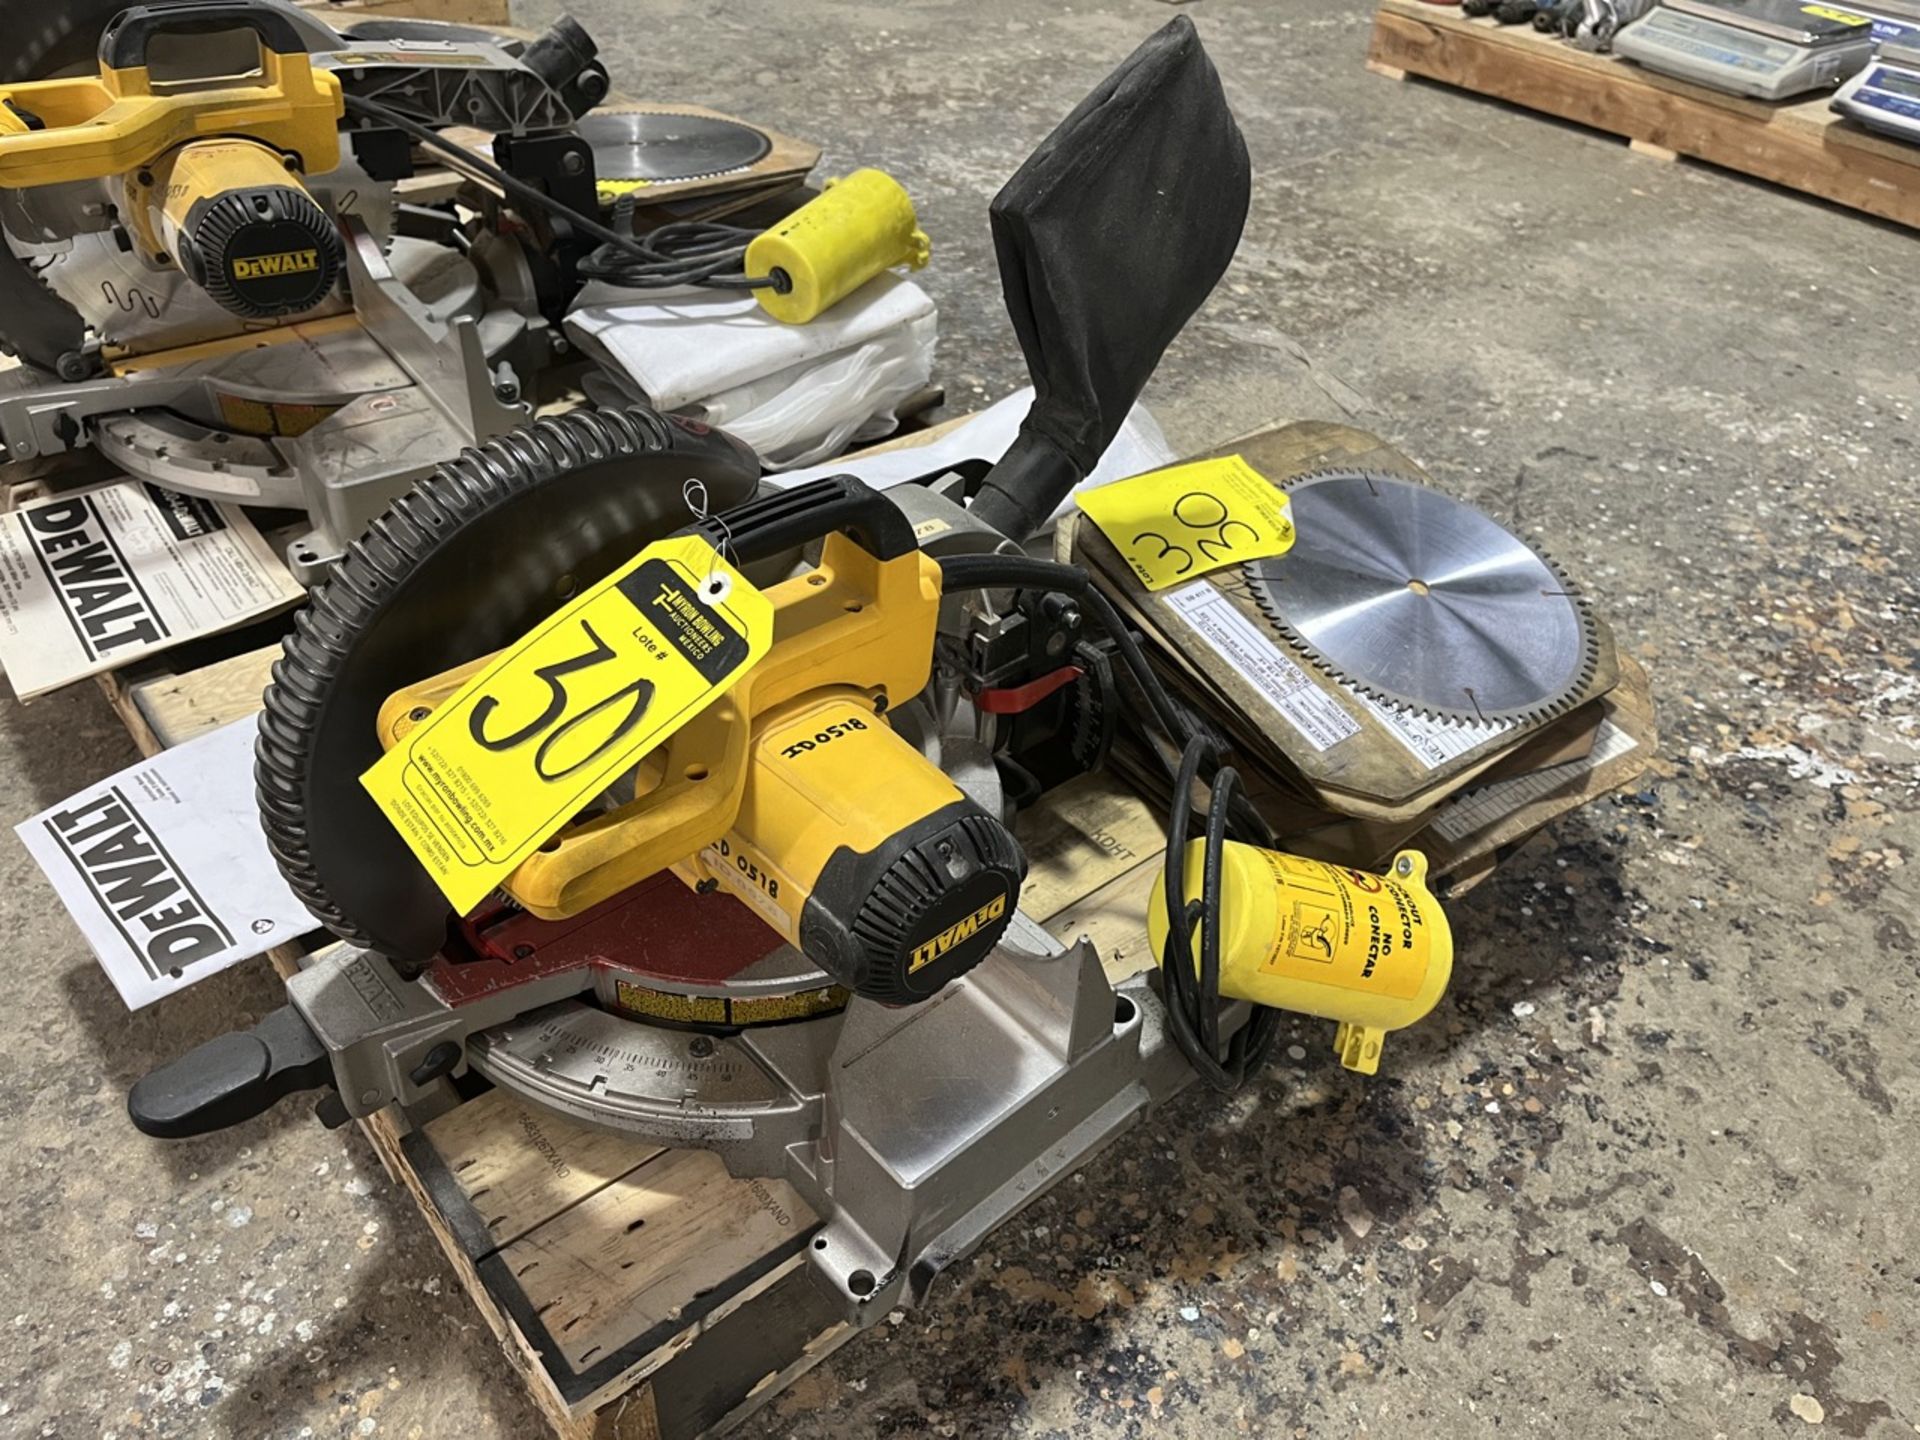 DEWALT 12" Miter Saw, Model DWS780, Serial No. SS, 120V, Includes 5 different sized blades and dust - Image 4 of 10